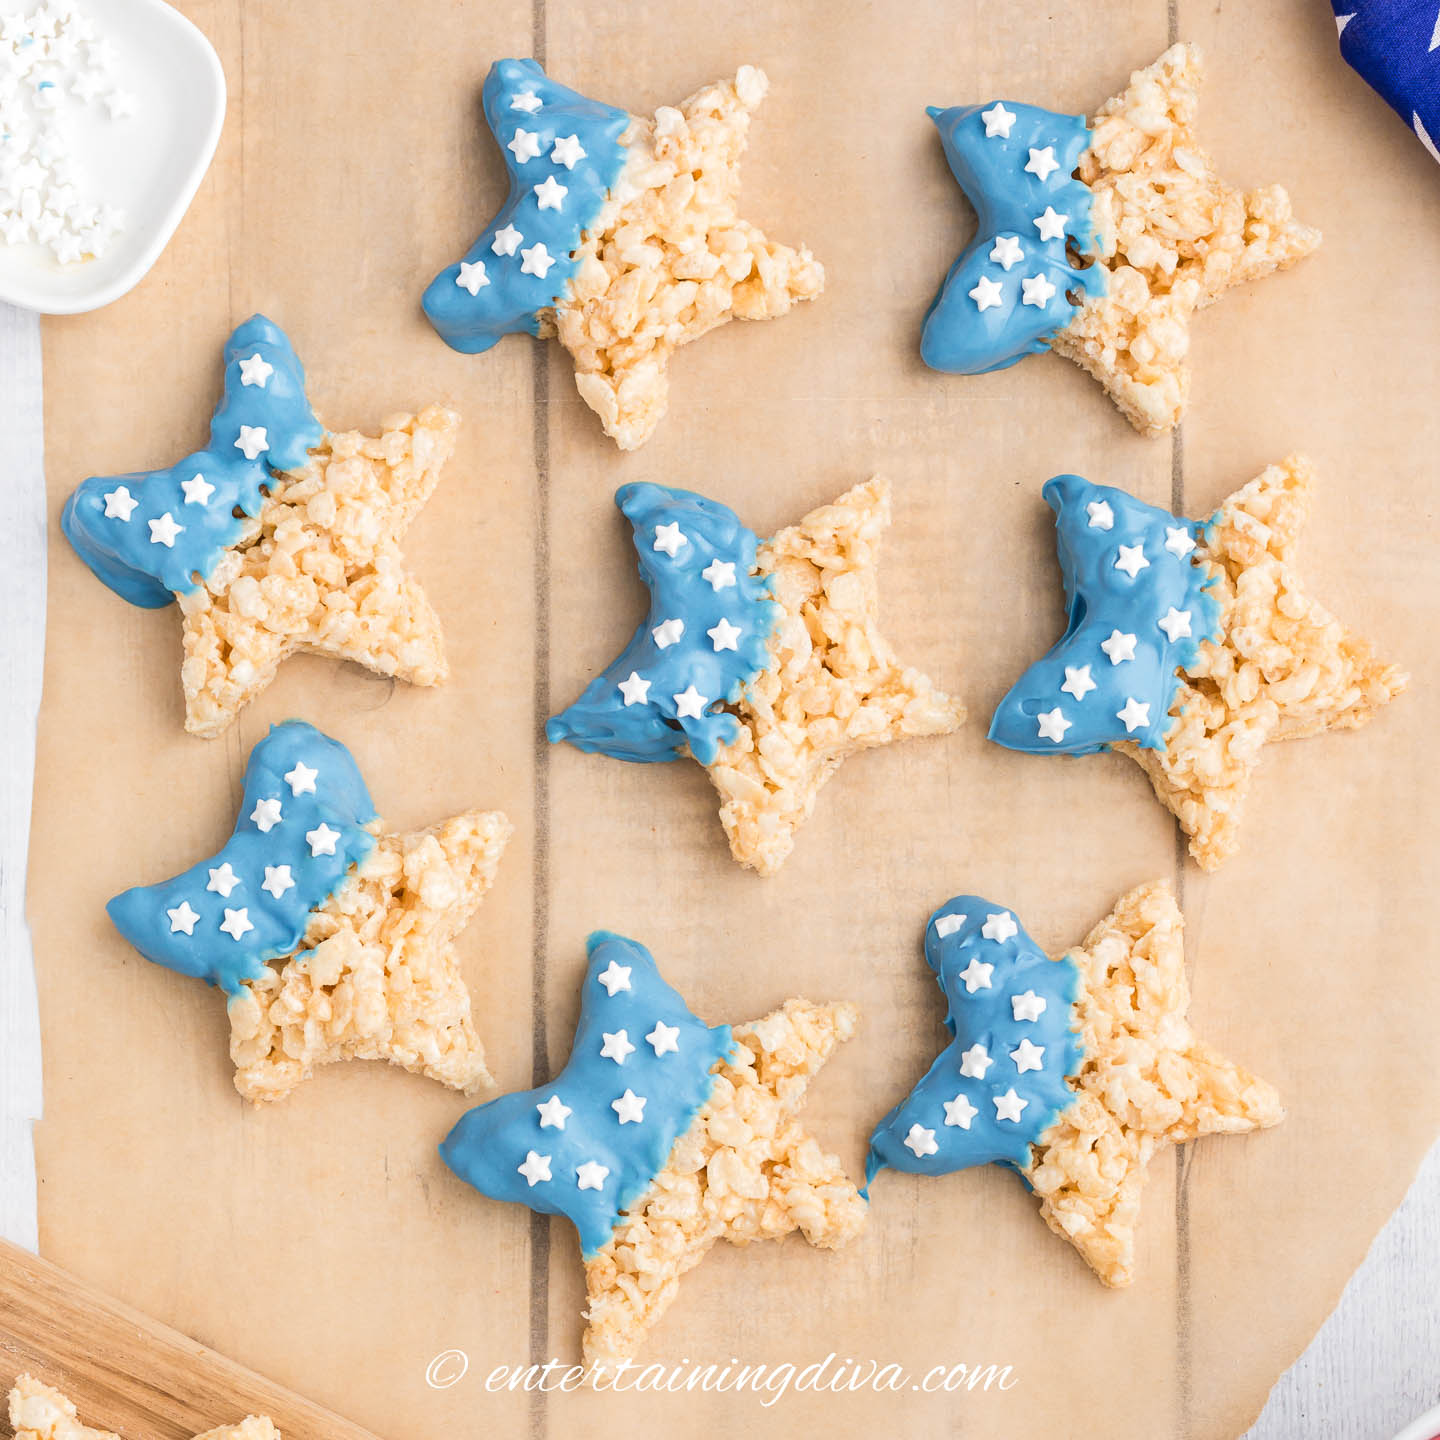 Star shaped rice krispie treats dipped in melted blue candy and sprinkled with white stars